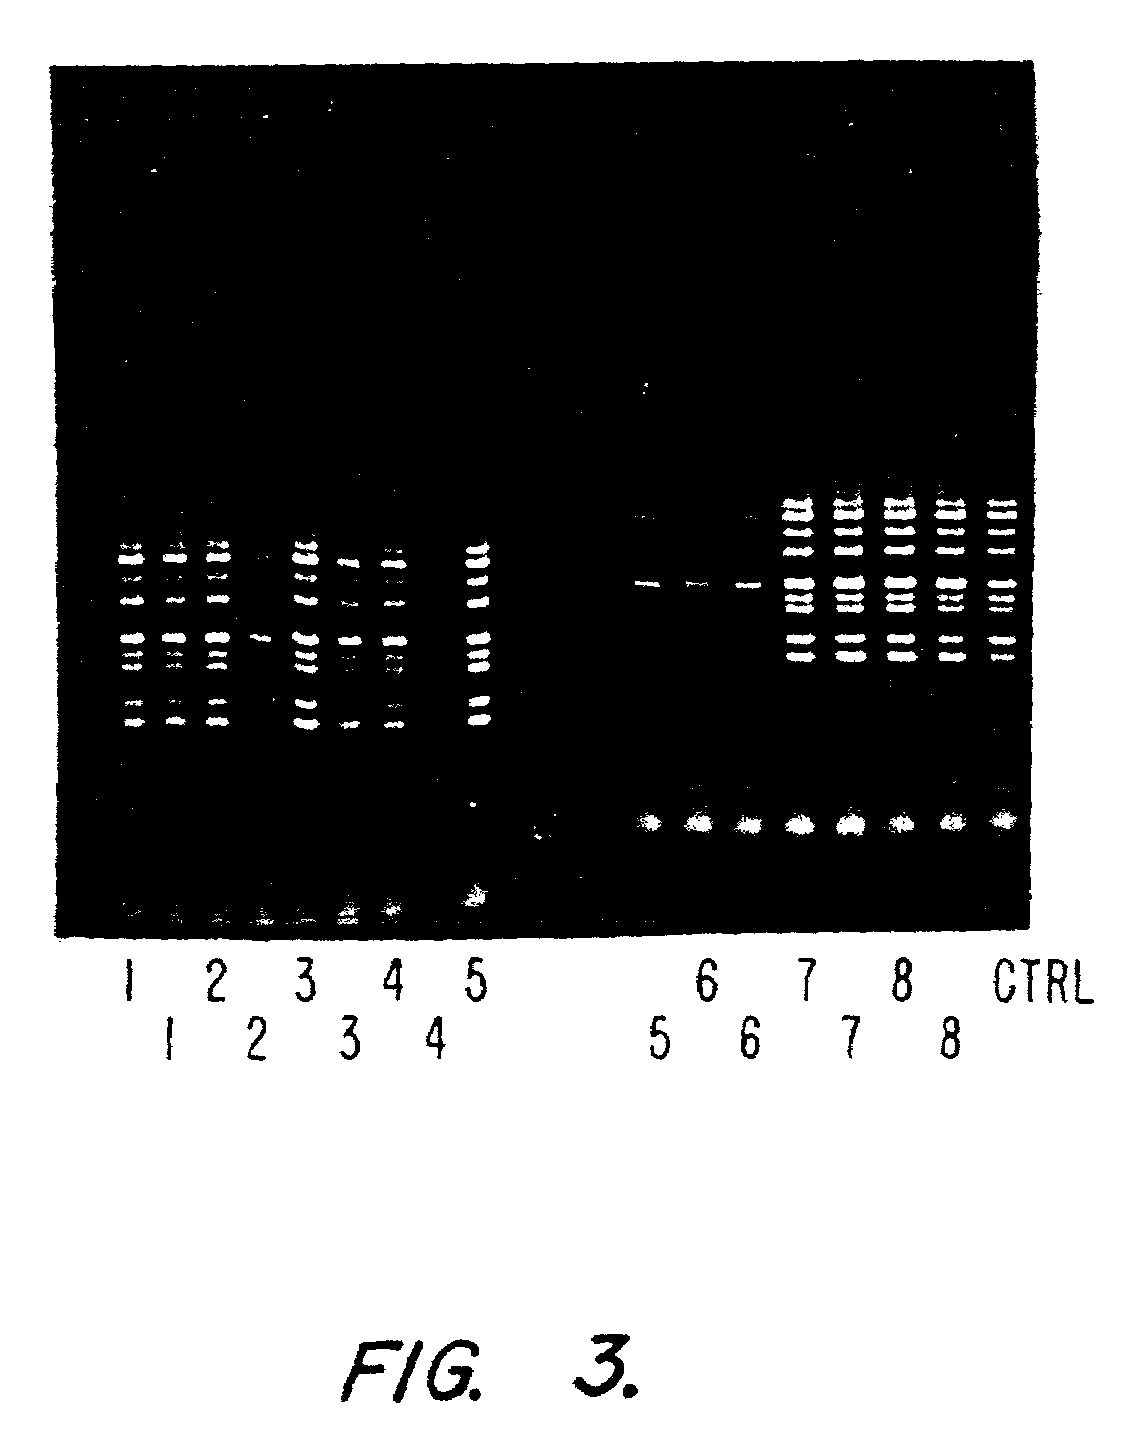 Simultaneous collection of DNA and non-nucleic analytes